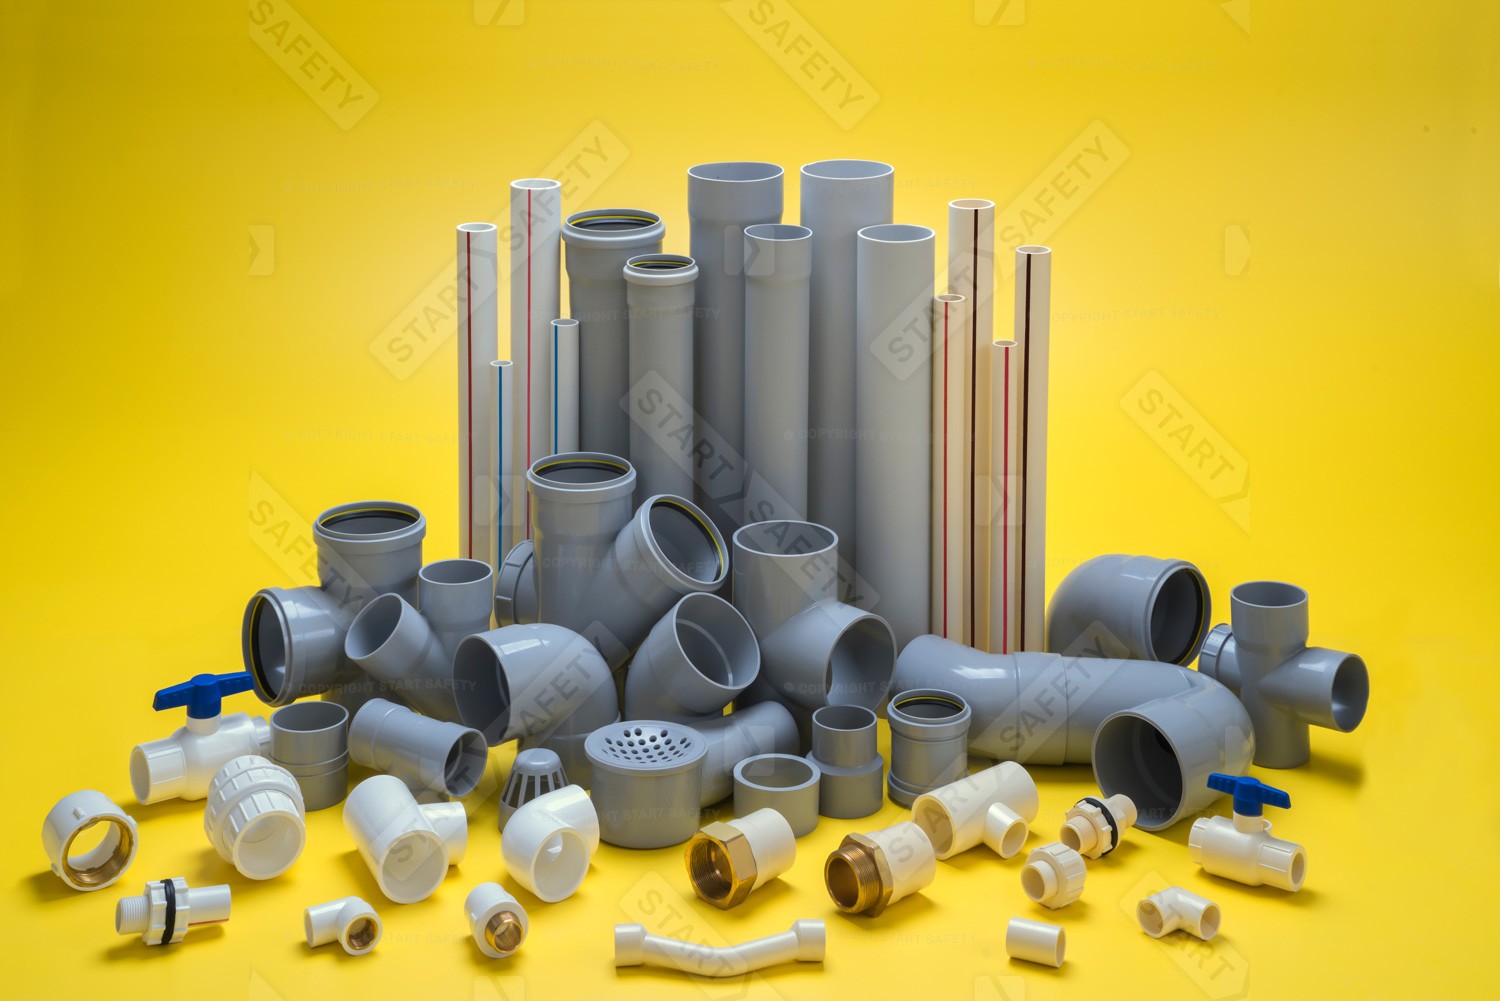 Collection of Pipes Compatible With PVC Glue